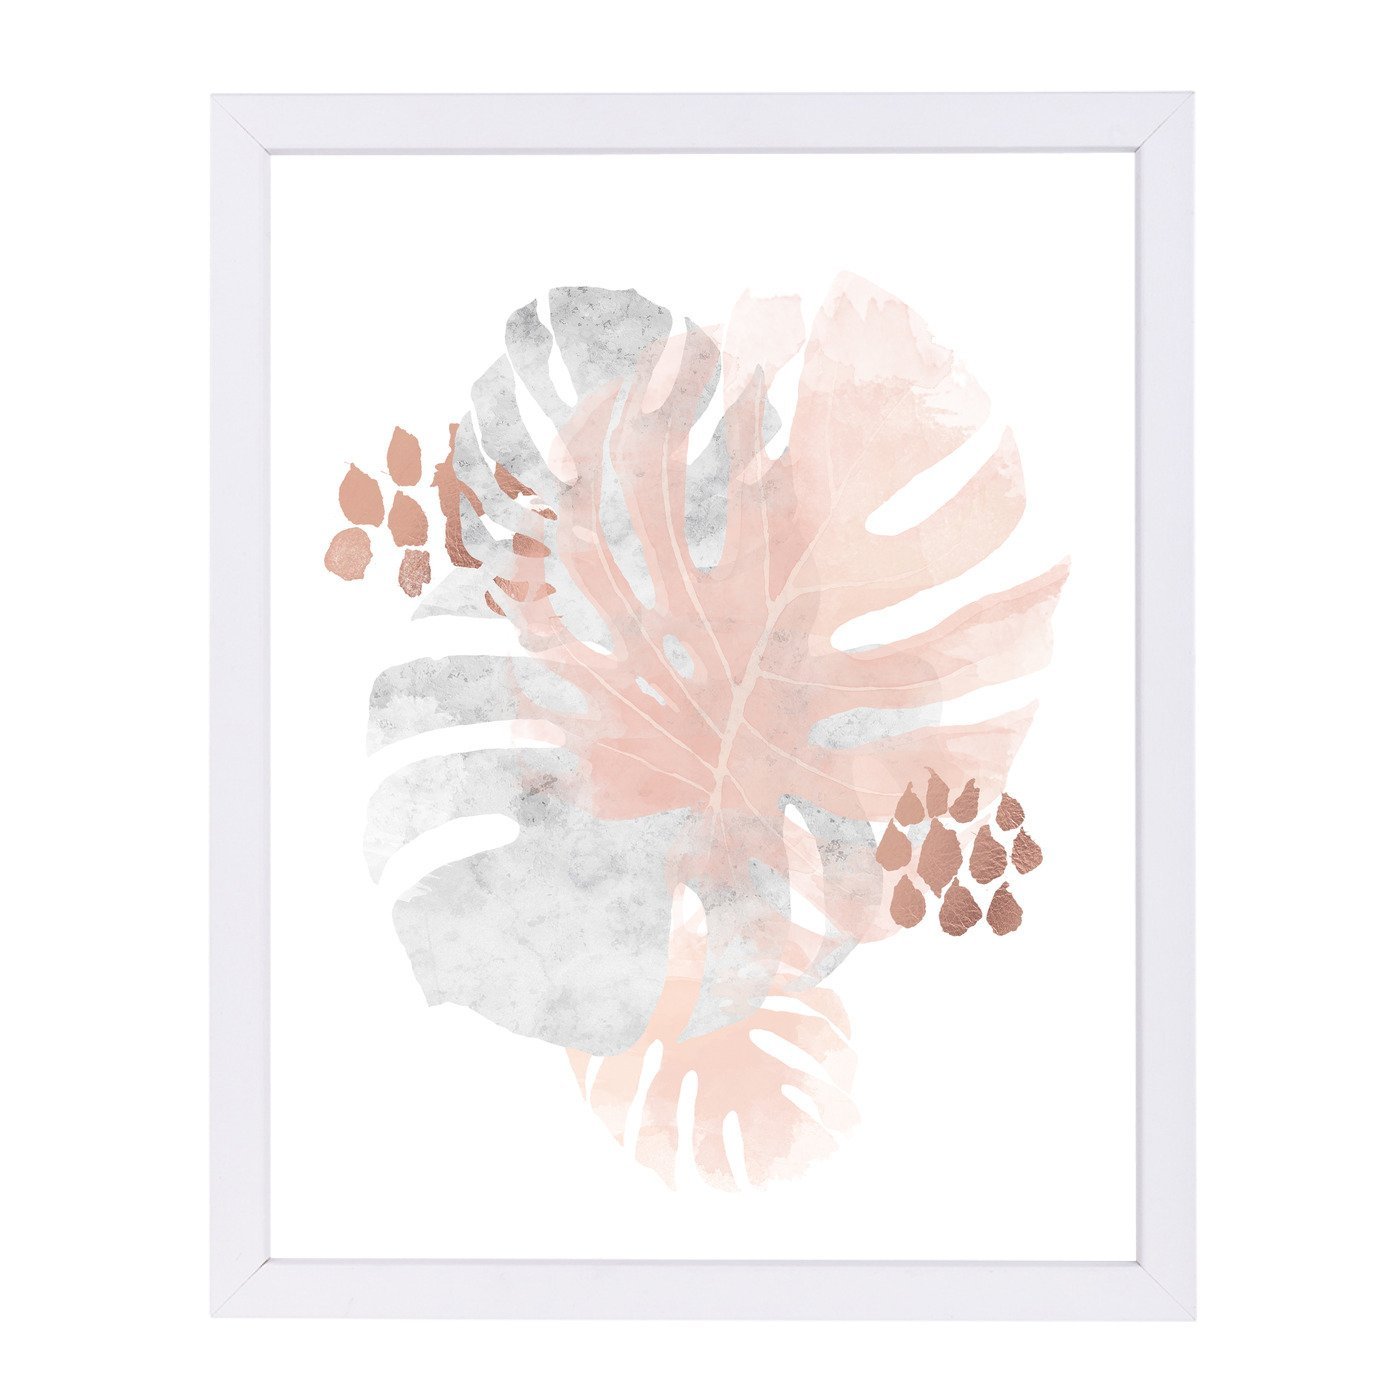 Abstract Monstera Copper 1 By Wall + Wonder - White Framed Print - Wall Art - Americanflat